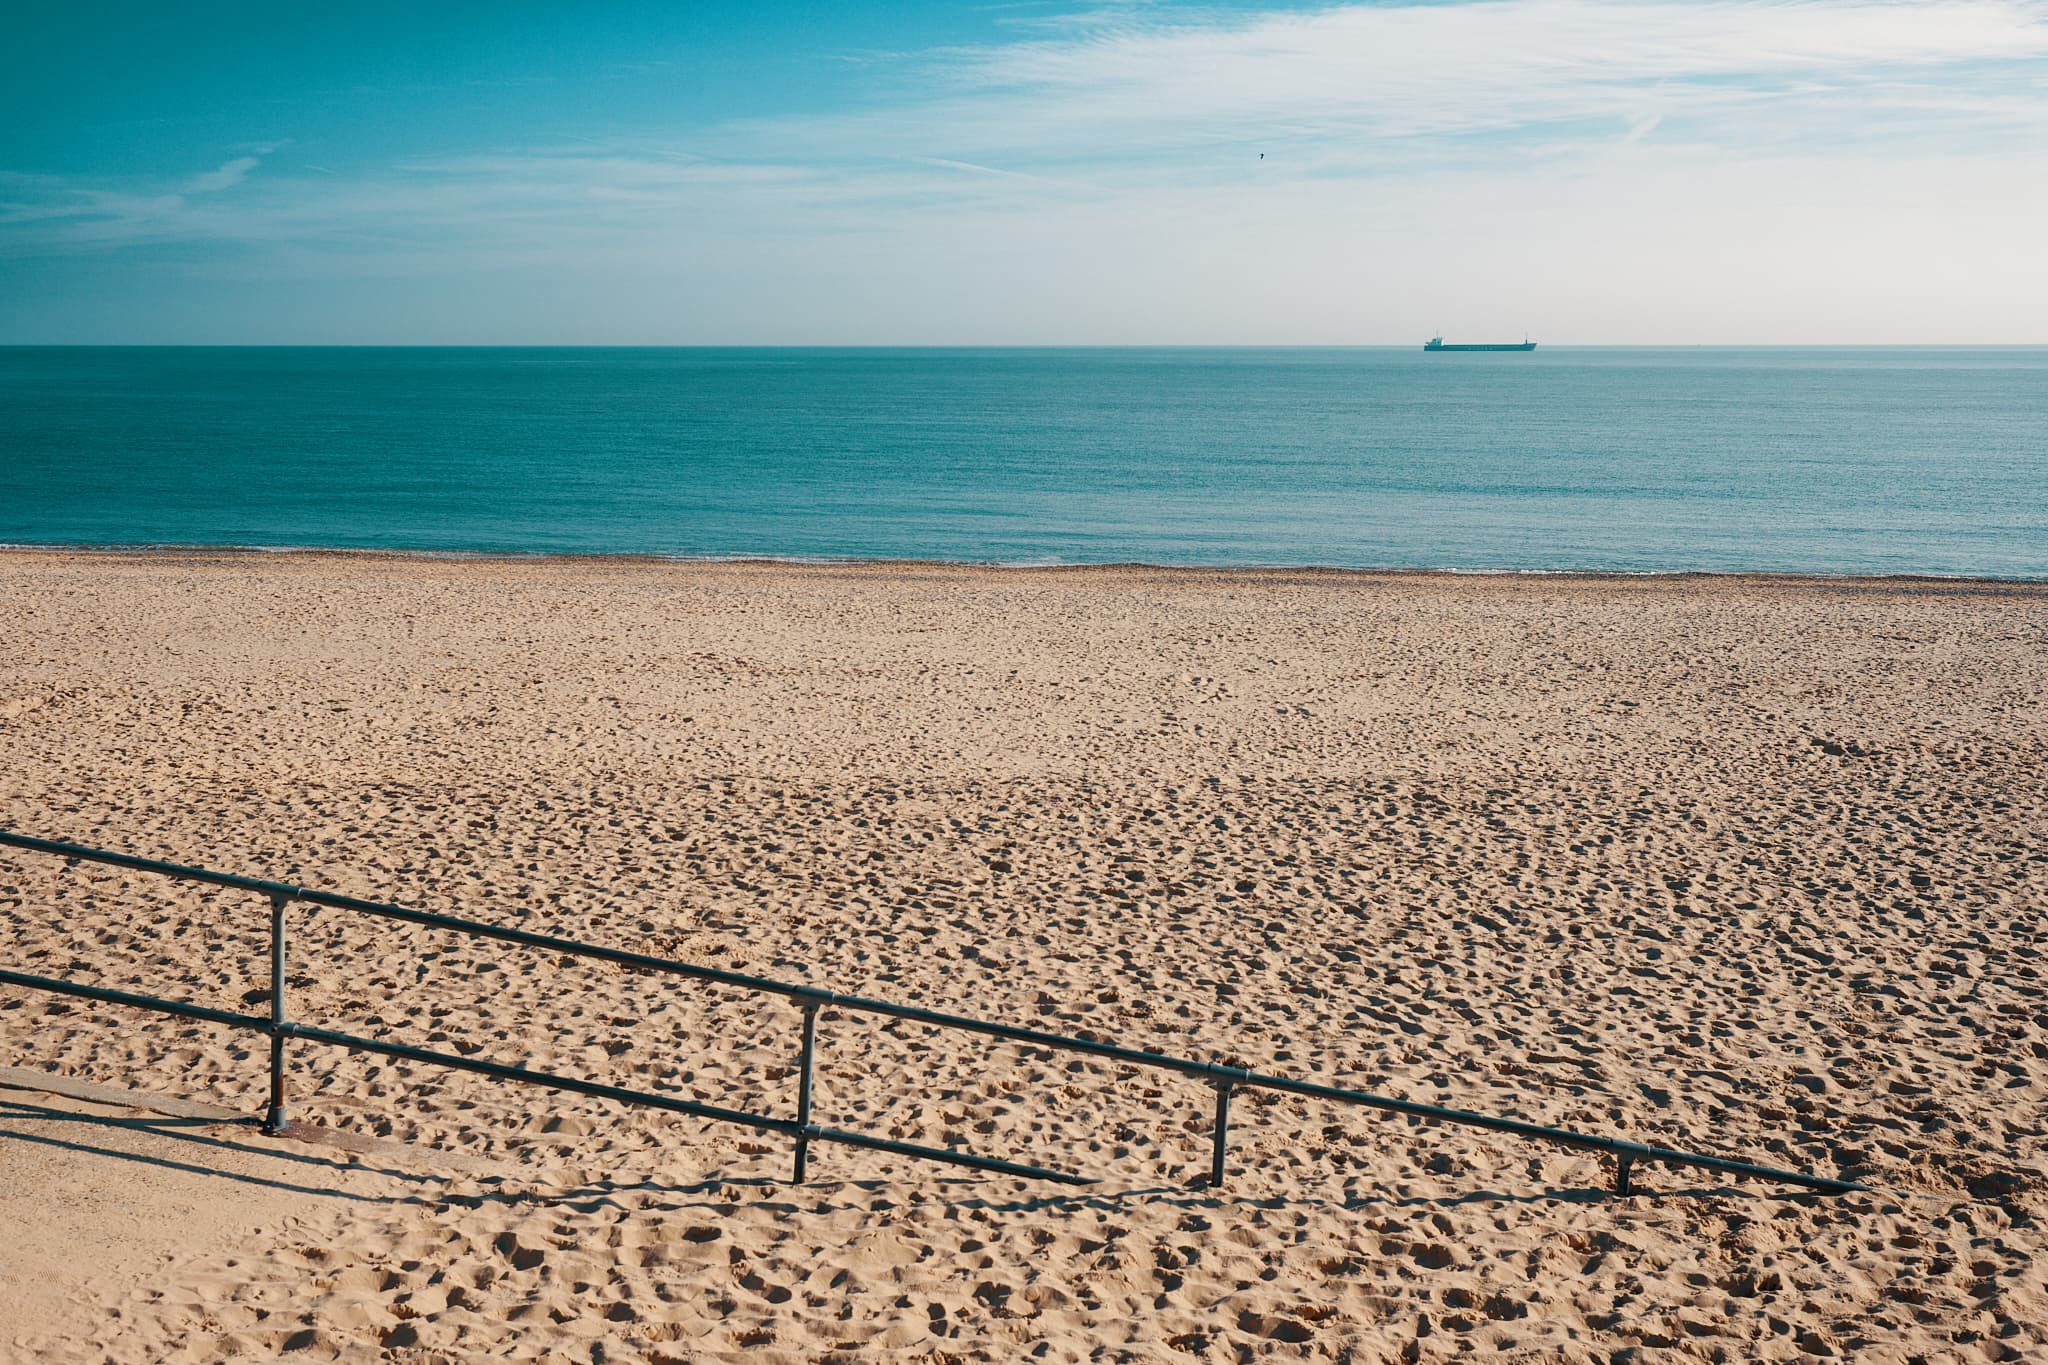 Lowestoft beach, with a railing disappearing into the sand